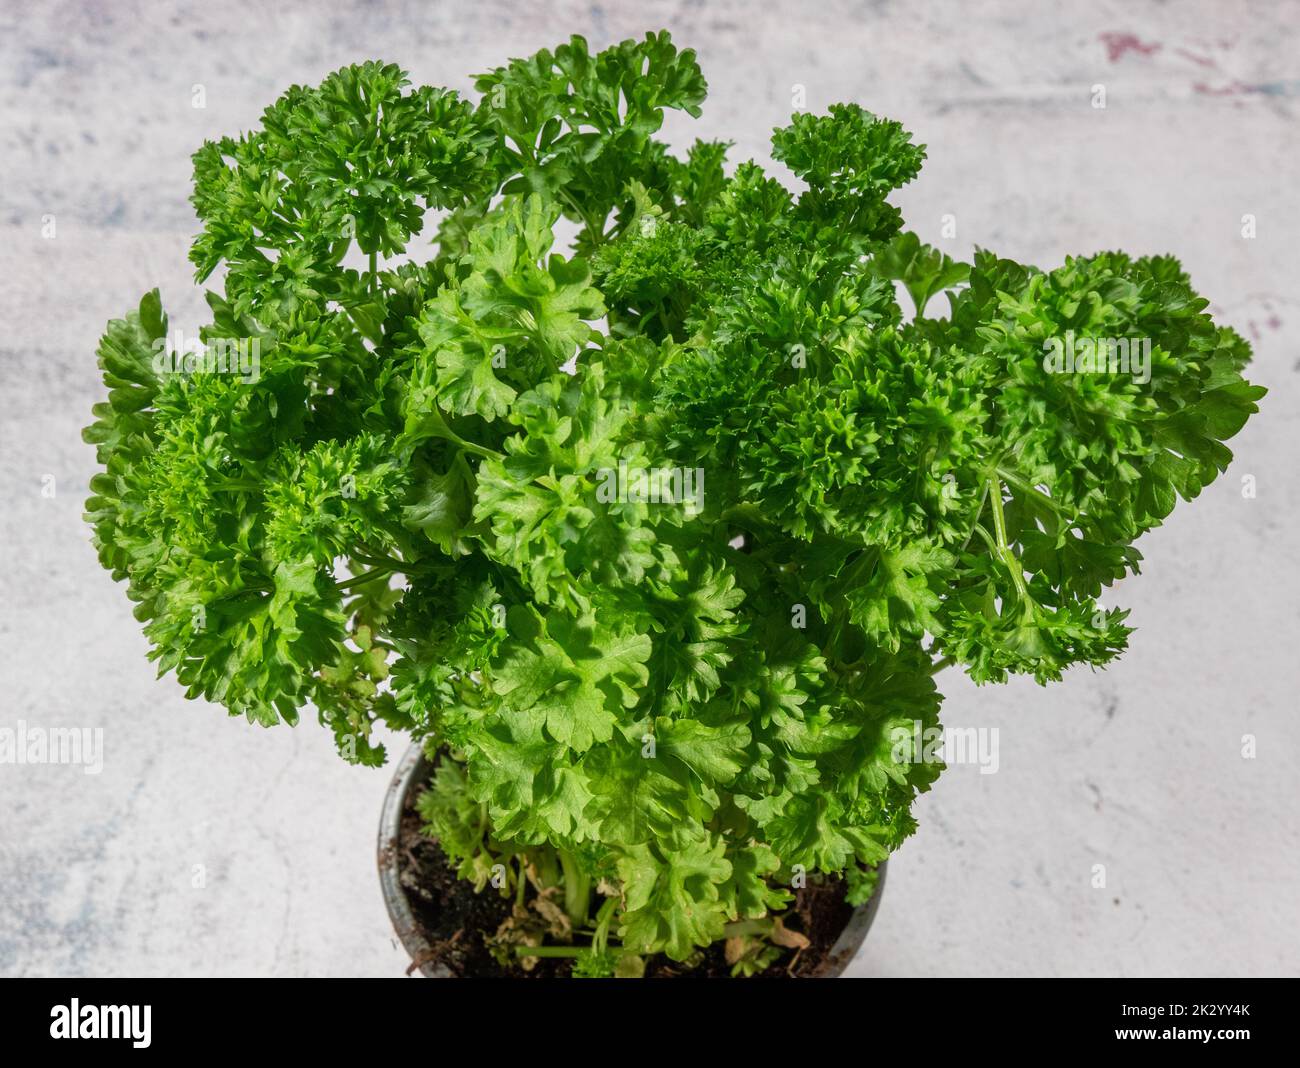 Curly leaf parsley in pot Stock Photo